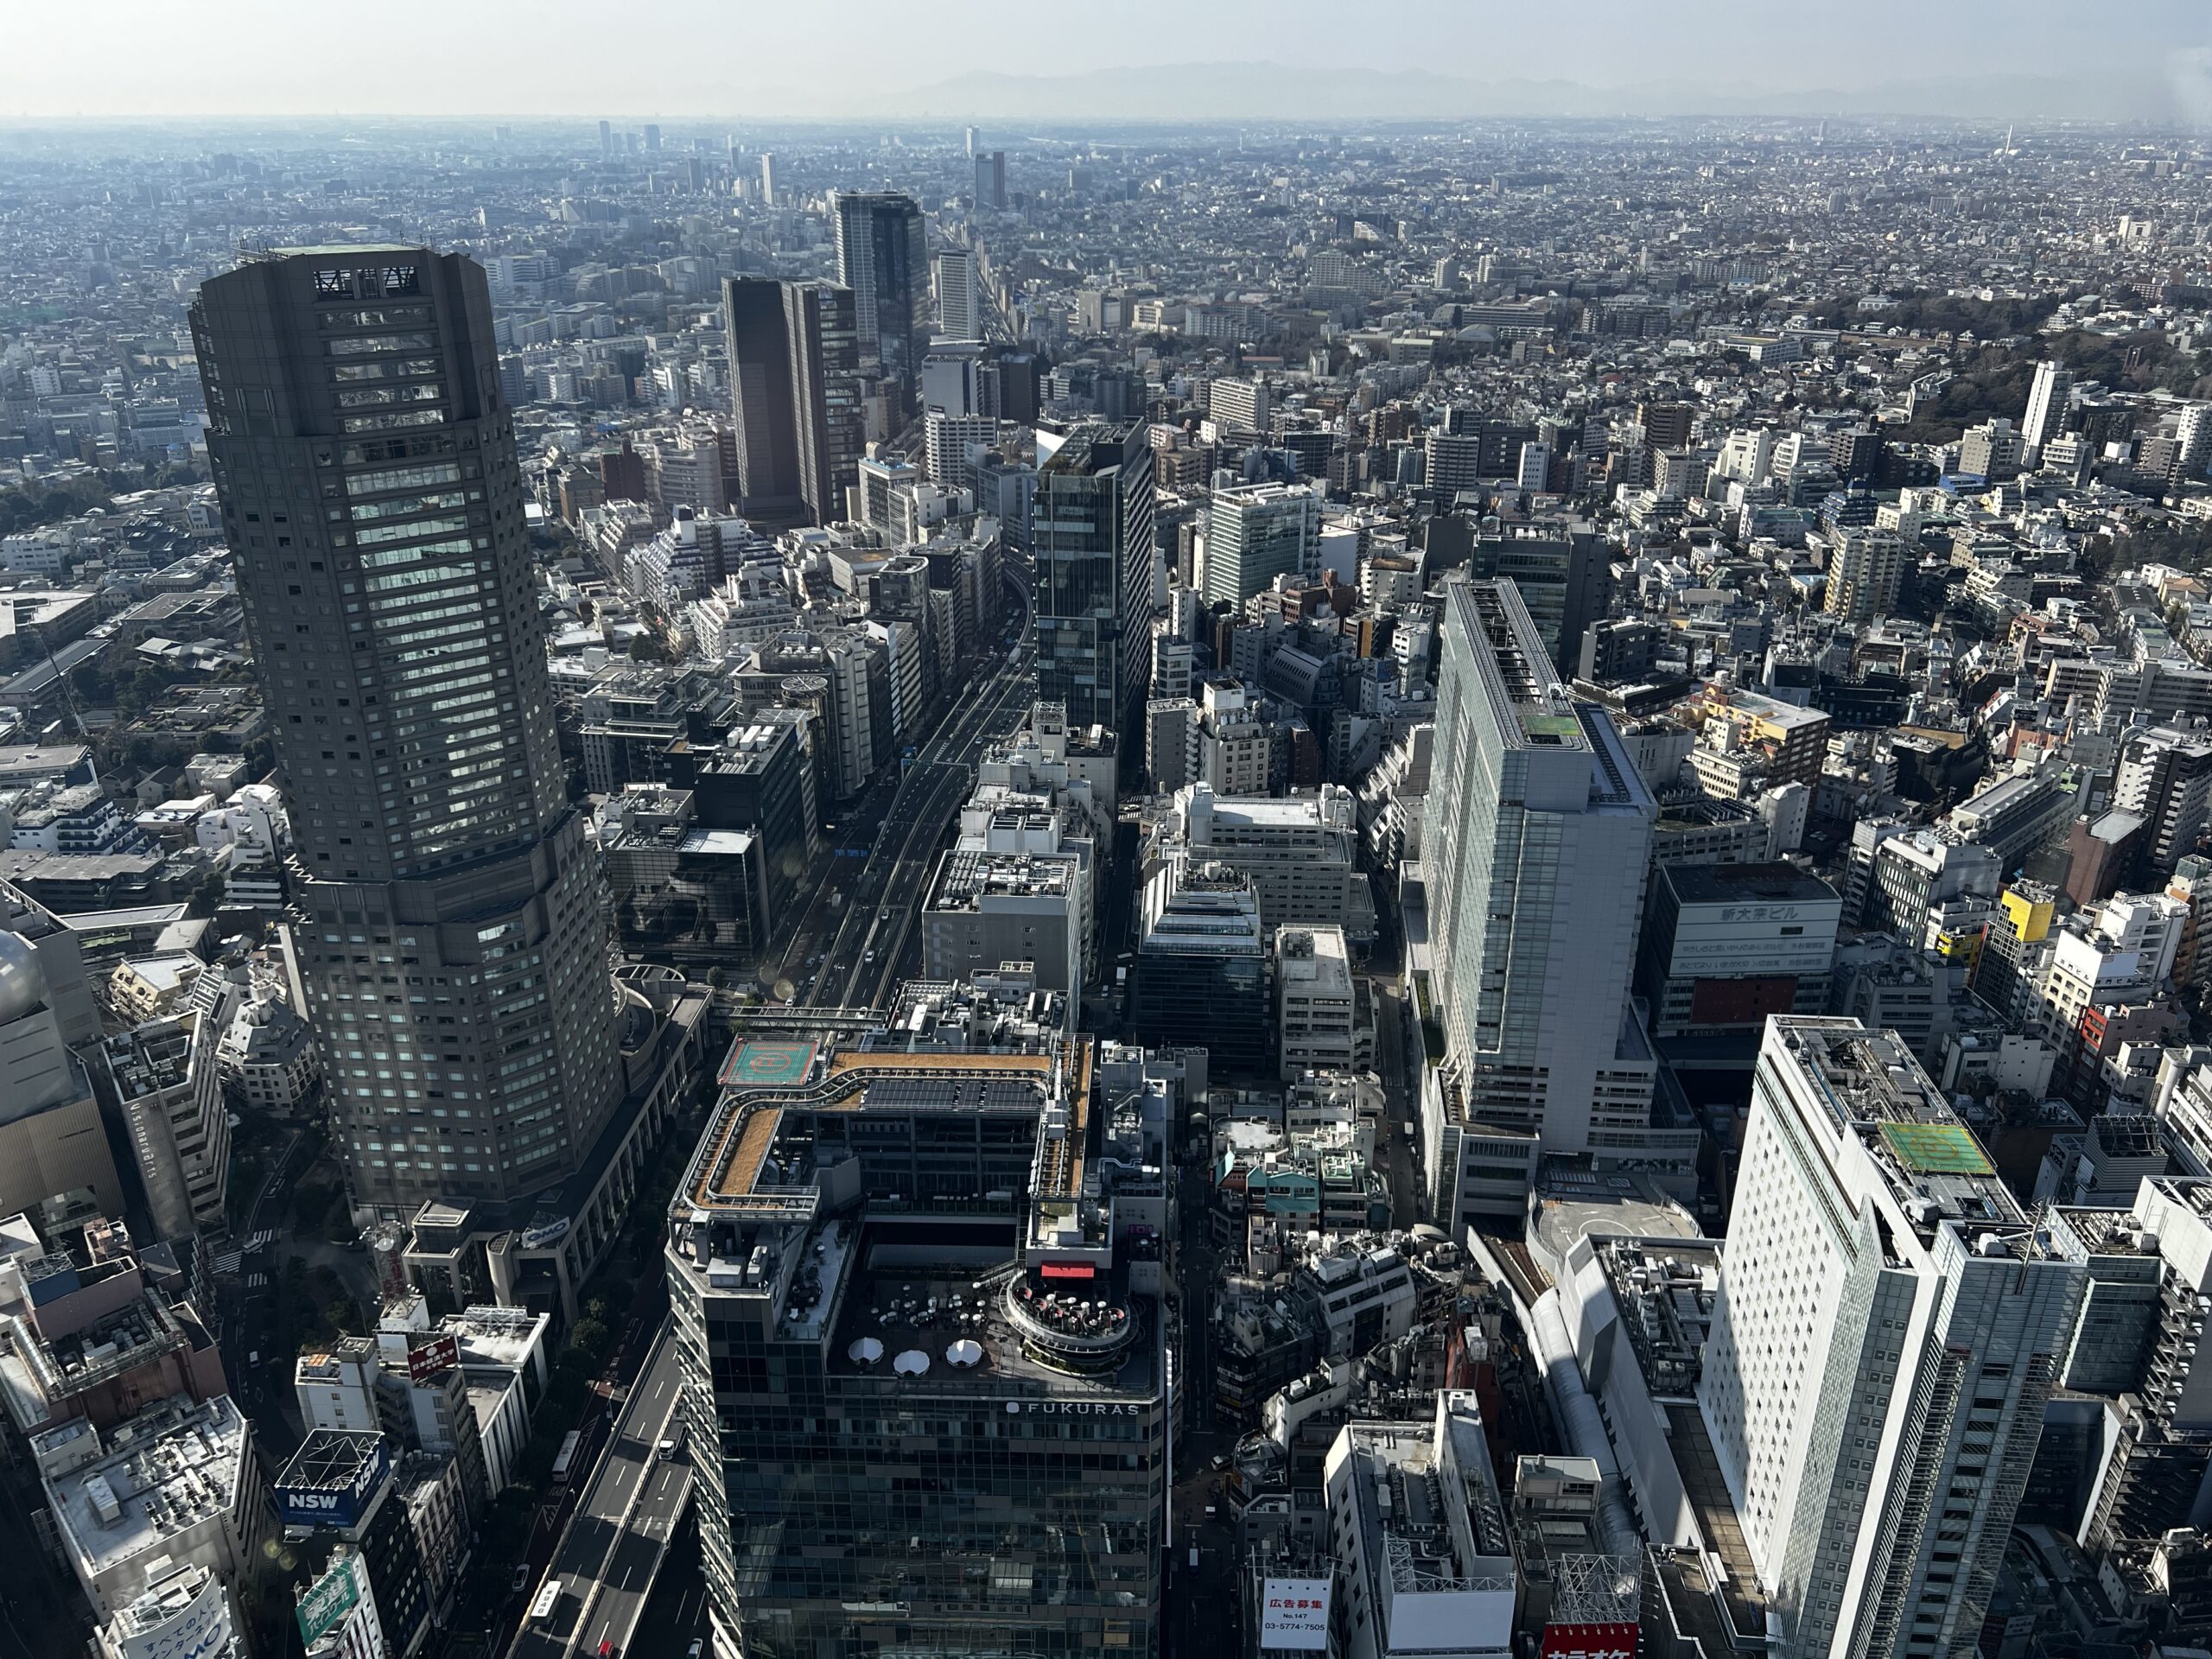 How to Spend Your Time in Tokyo: Suggested Itineraries for 2023